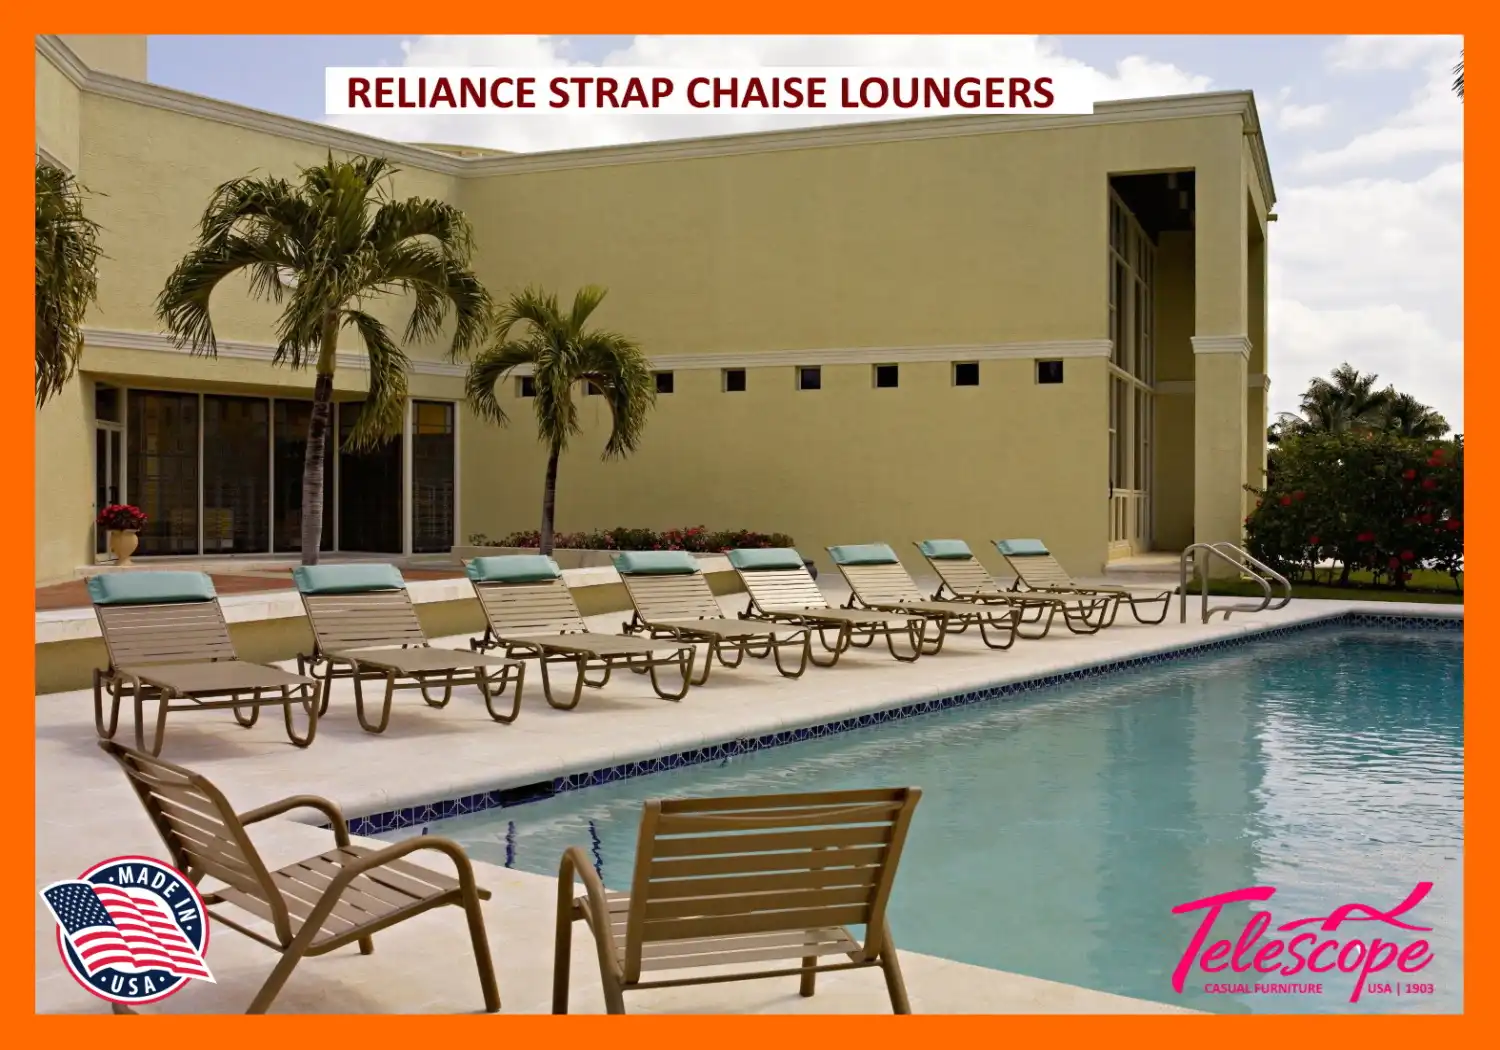 RELIANCE STRAP CHAISE LOUNGERS